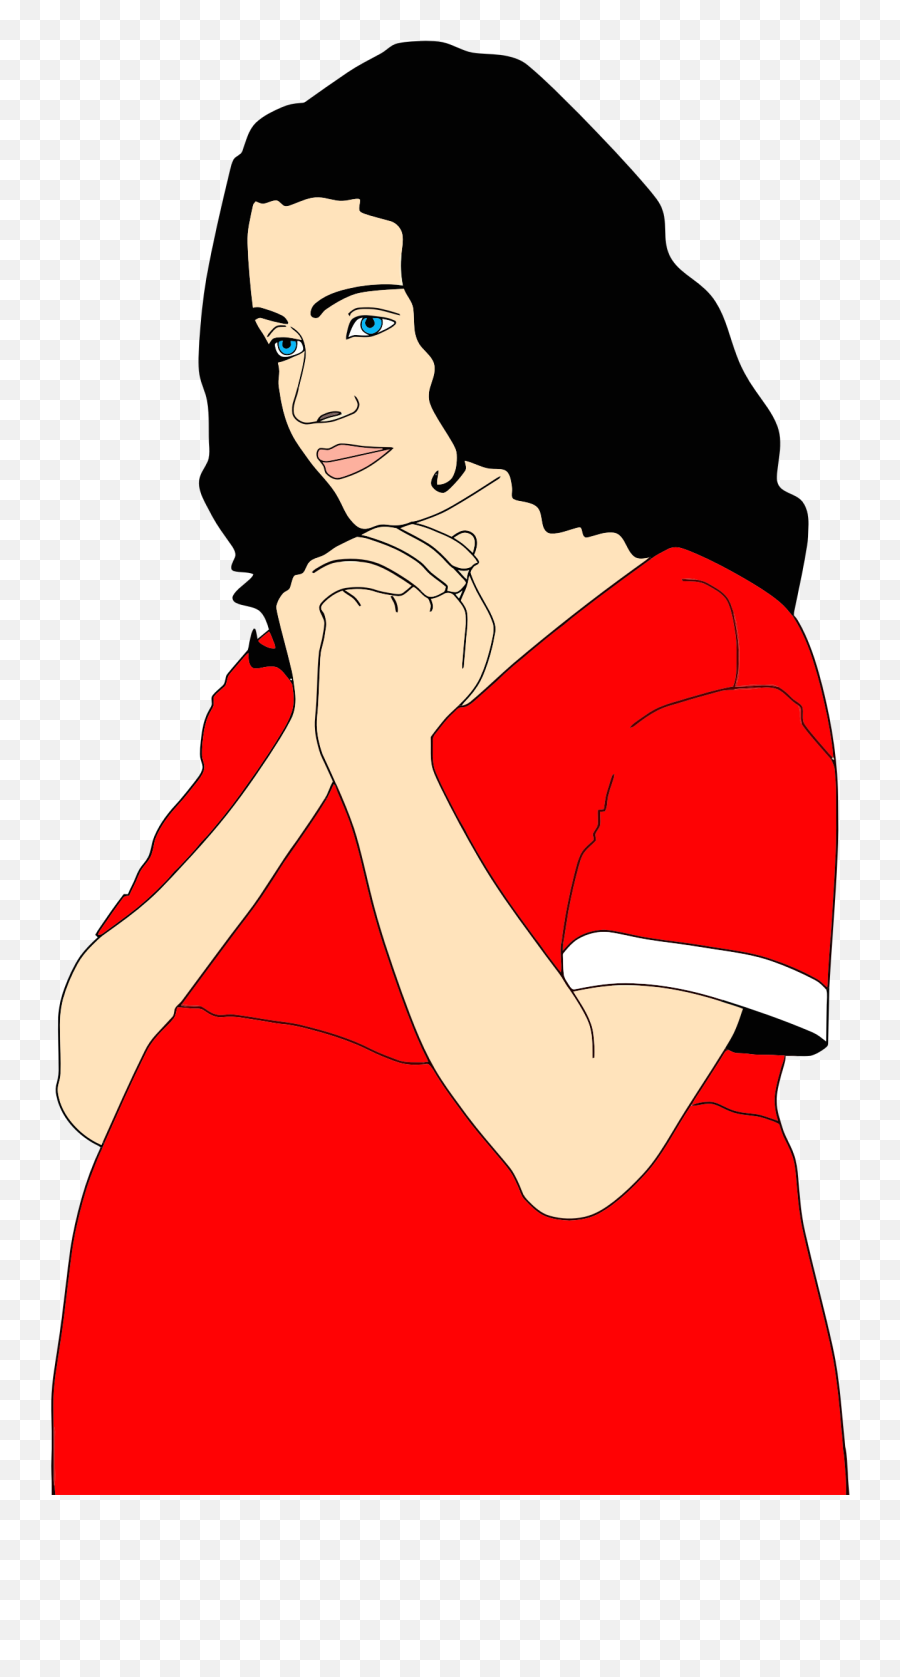 This Free Icons Png Design Of Pregnant Woman Praying Full - 10 Weeks Pregnancy Symptoms,Pregnant Woman Png